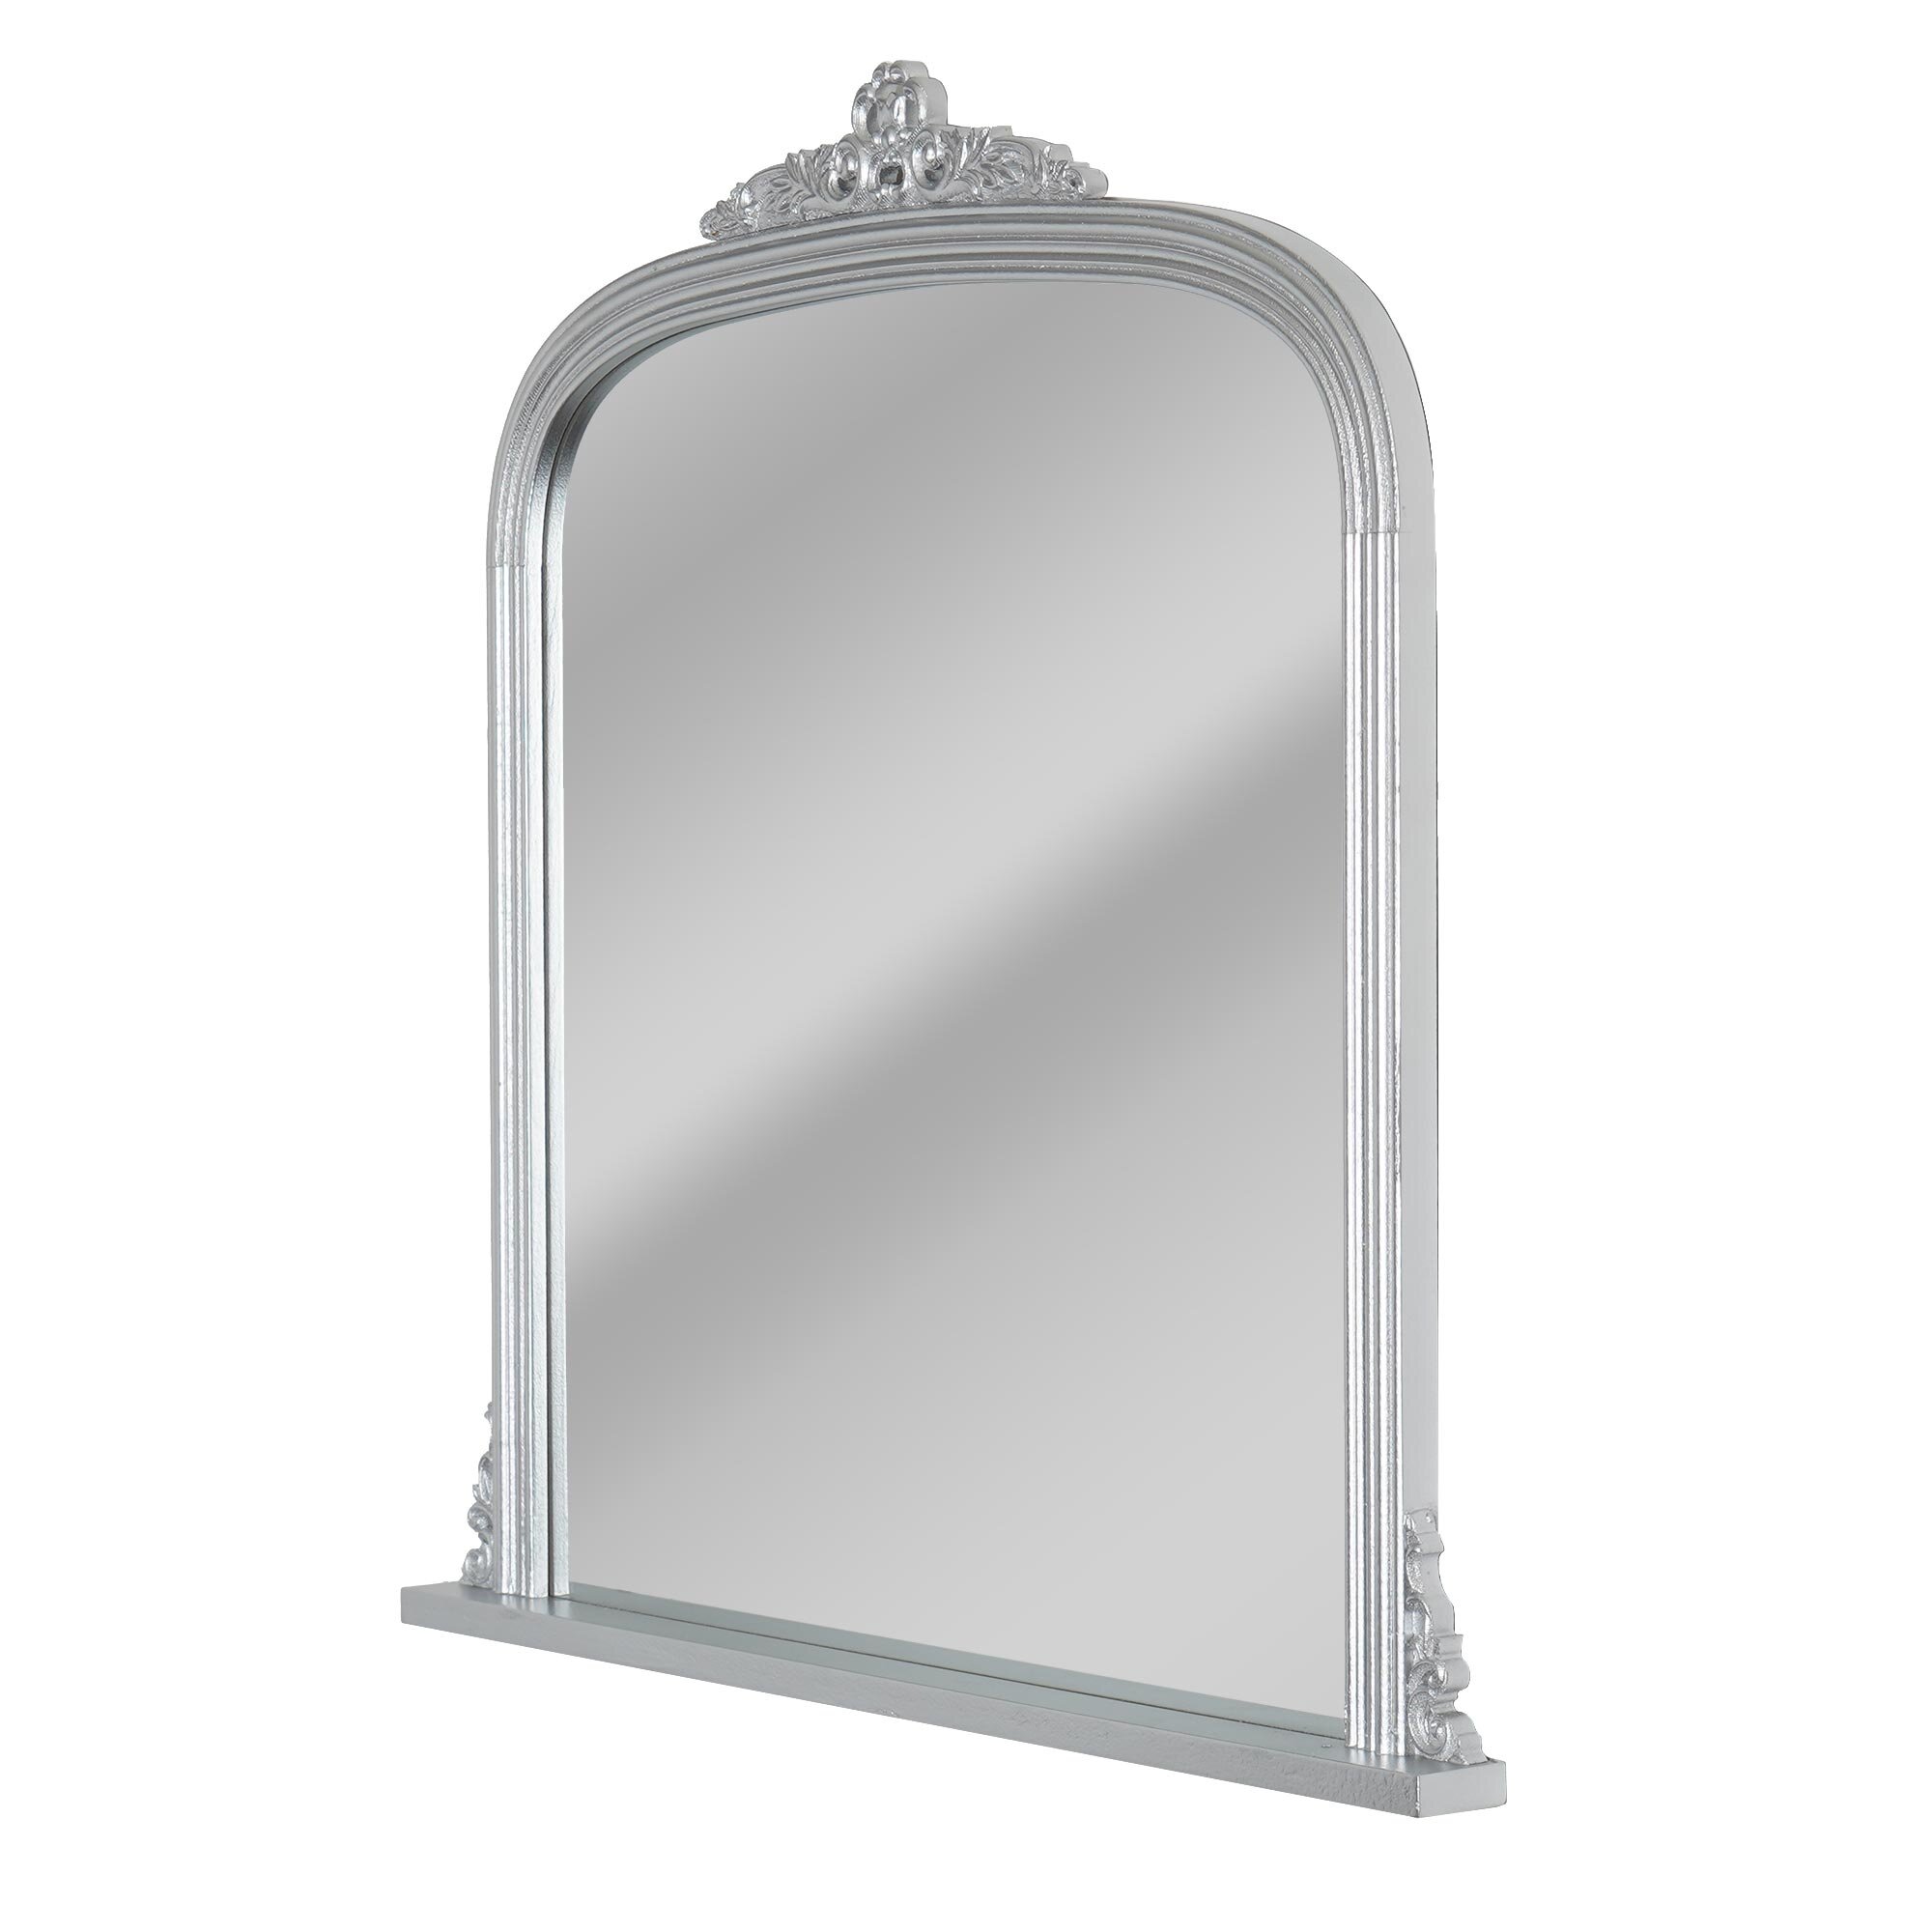 Head West Arch Silver Ornate Accent Wall Mirror